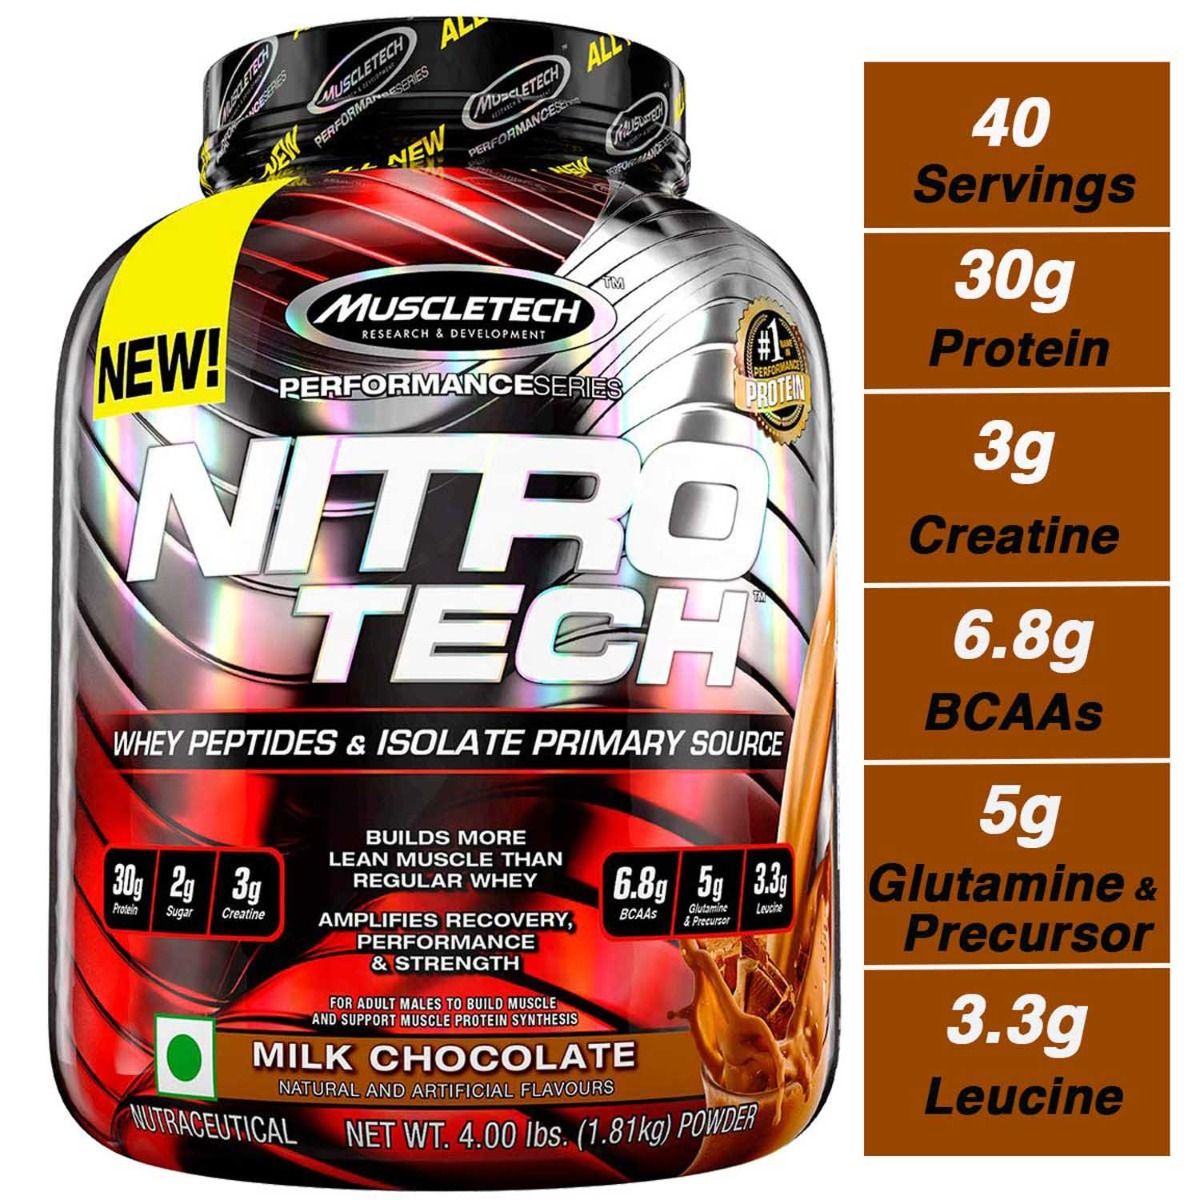 Buy Muscletech Nitrotech Performance Series Whey Peptides & Isolate Primary Source Milk Chocolate Flavour Powder, 4 lb Online